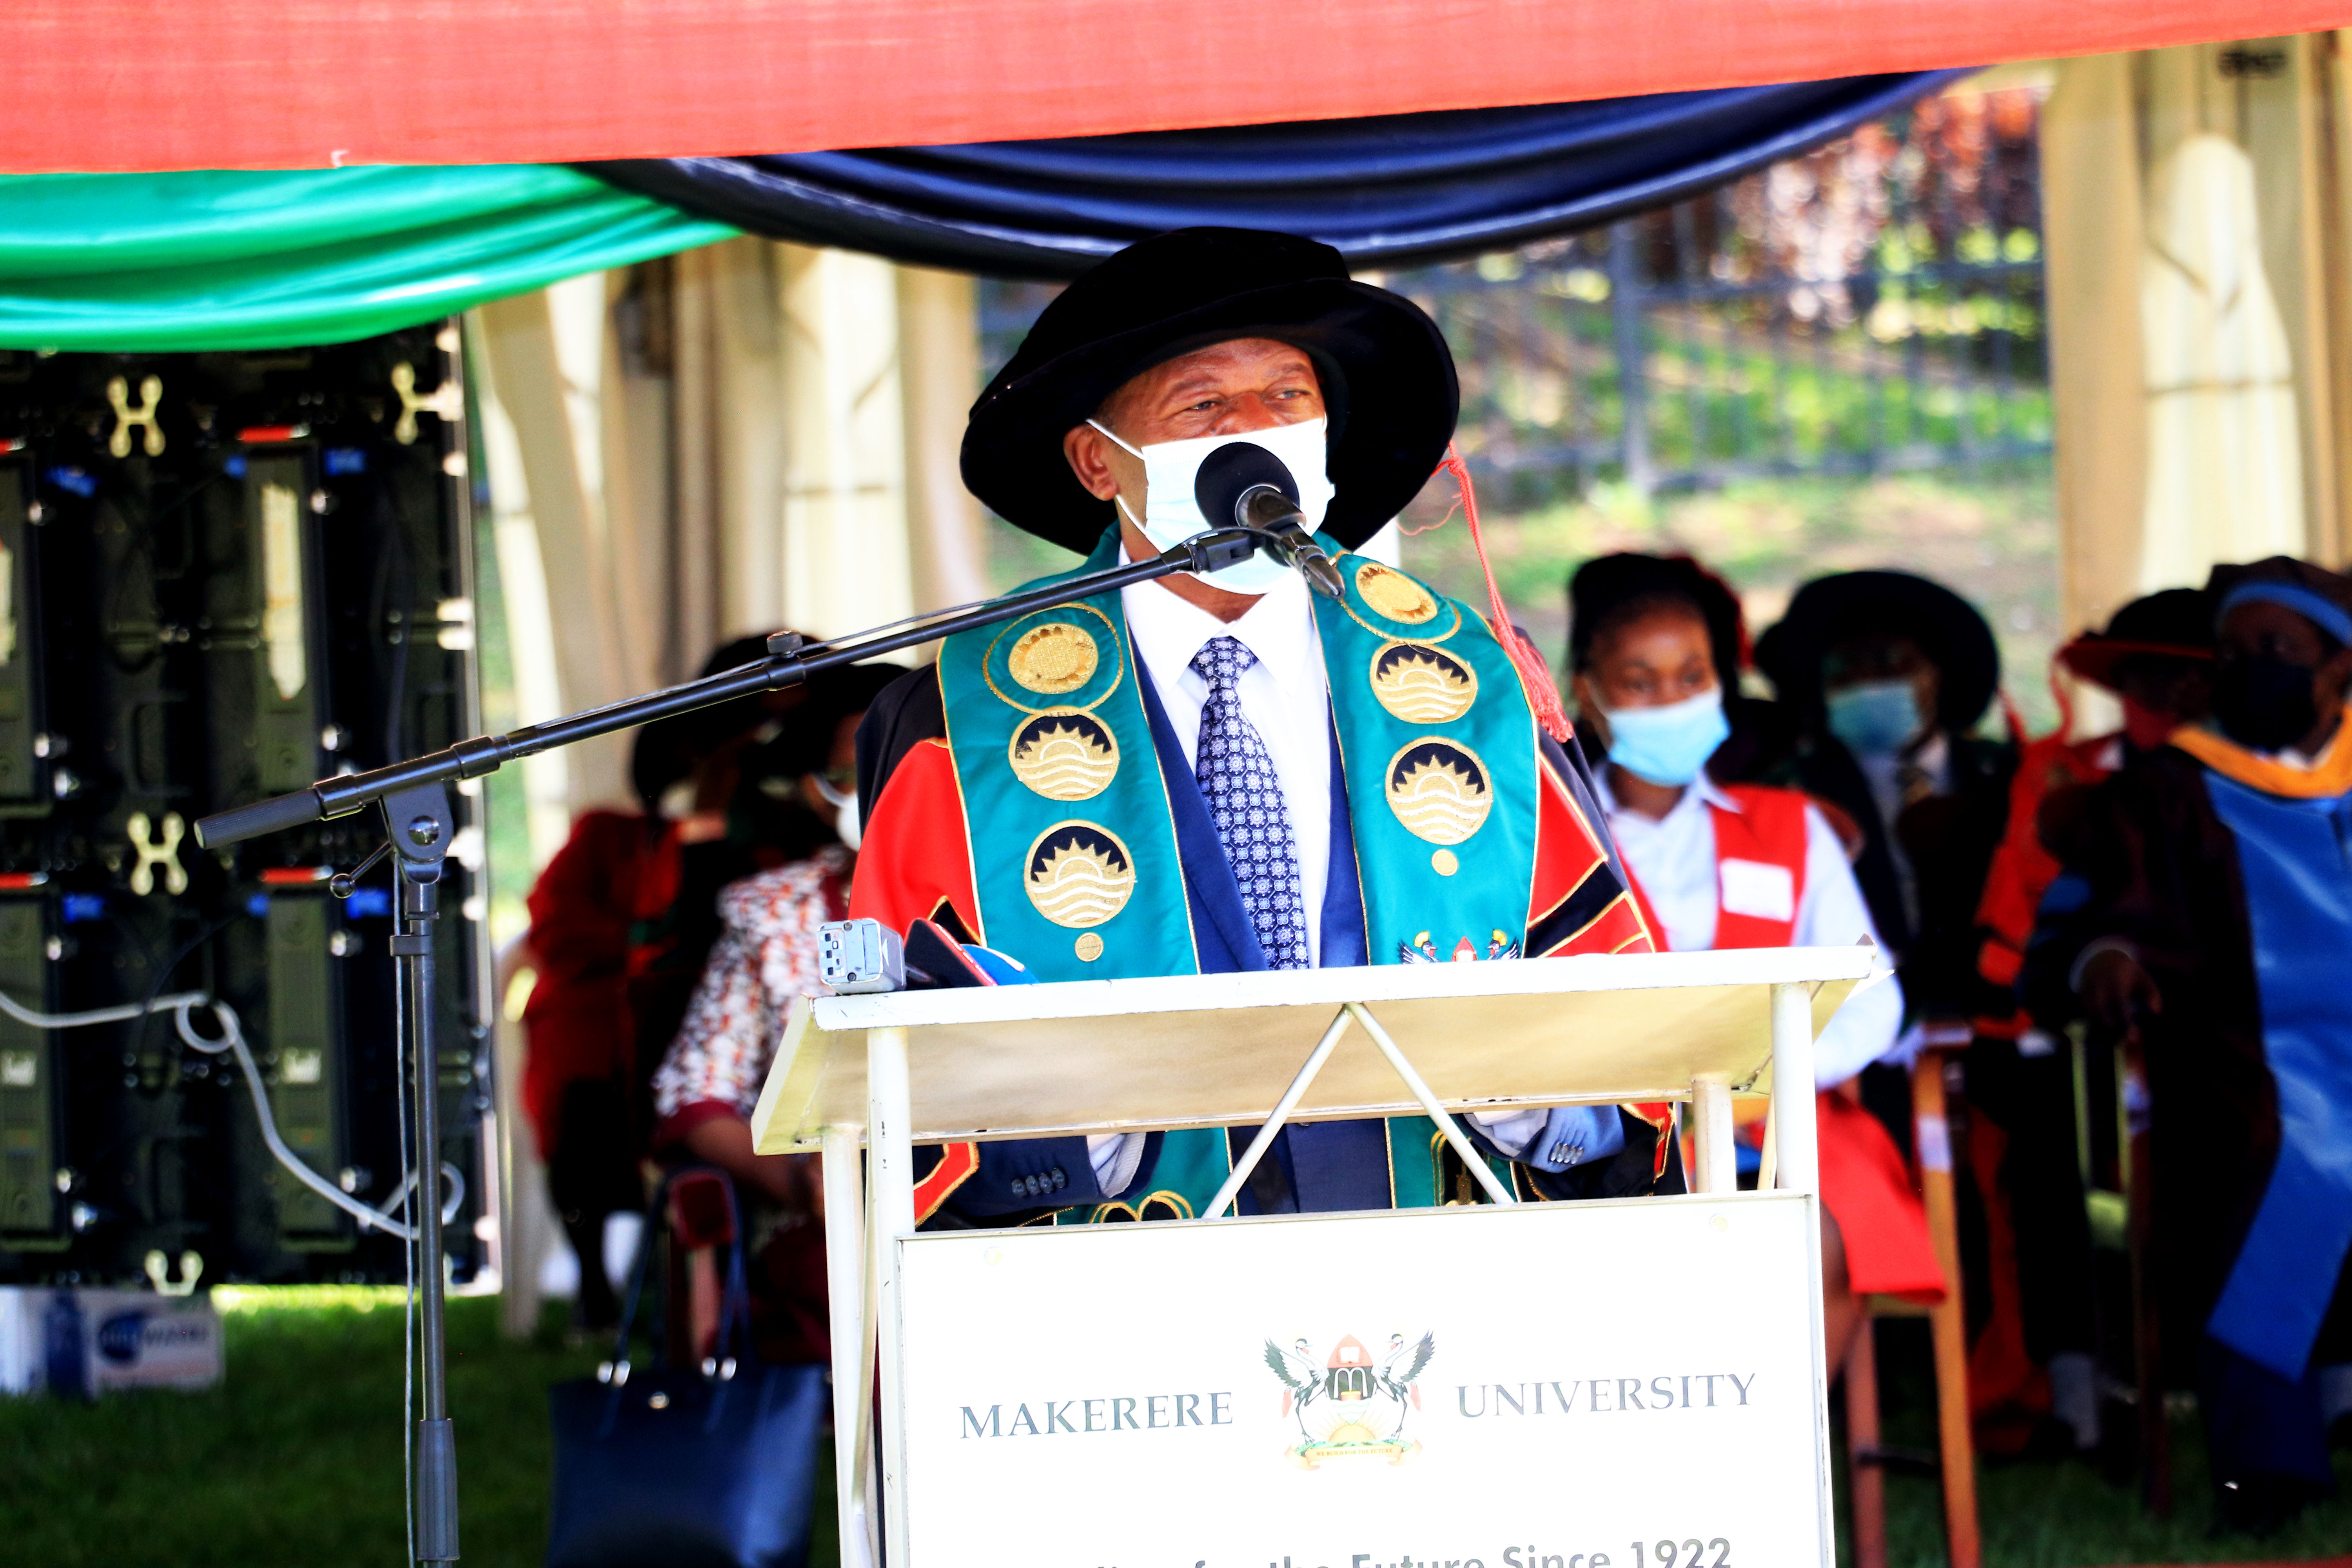 Hon. Dr. John Chrysestom Muyingo, State Minister for Higher Education Representing the First Lady and Minister of Education and Sports, Hon. Janet K. Museveni